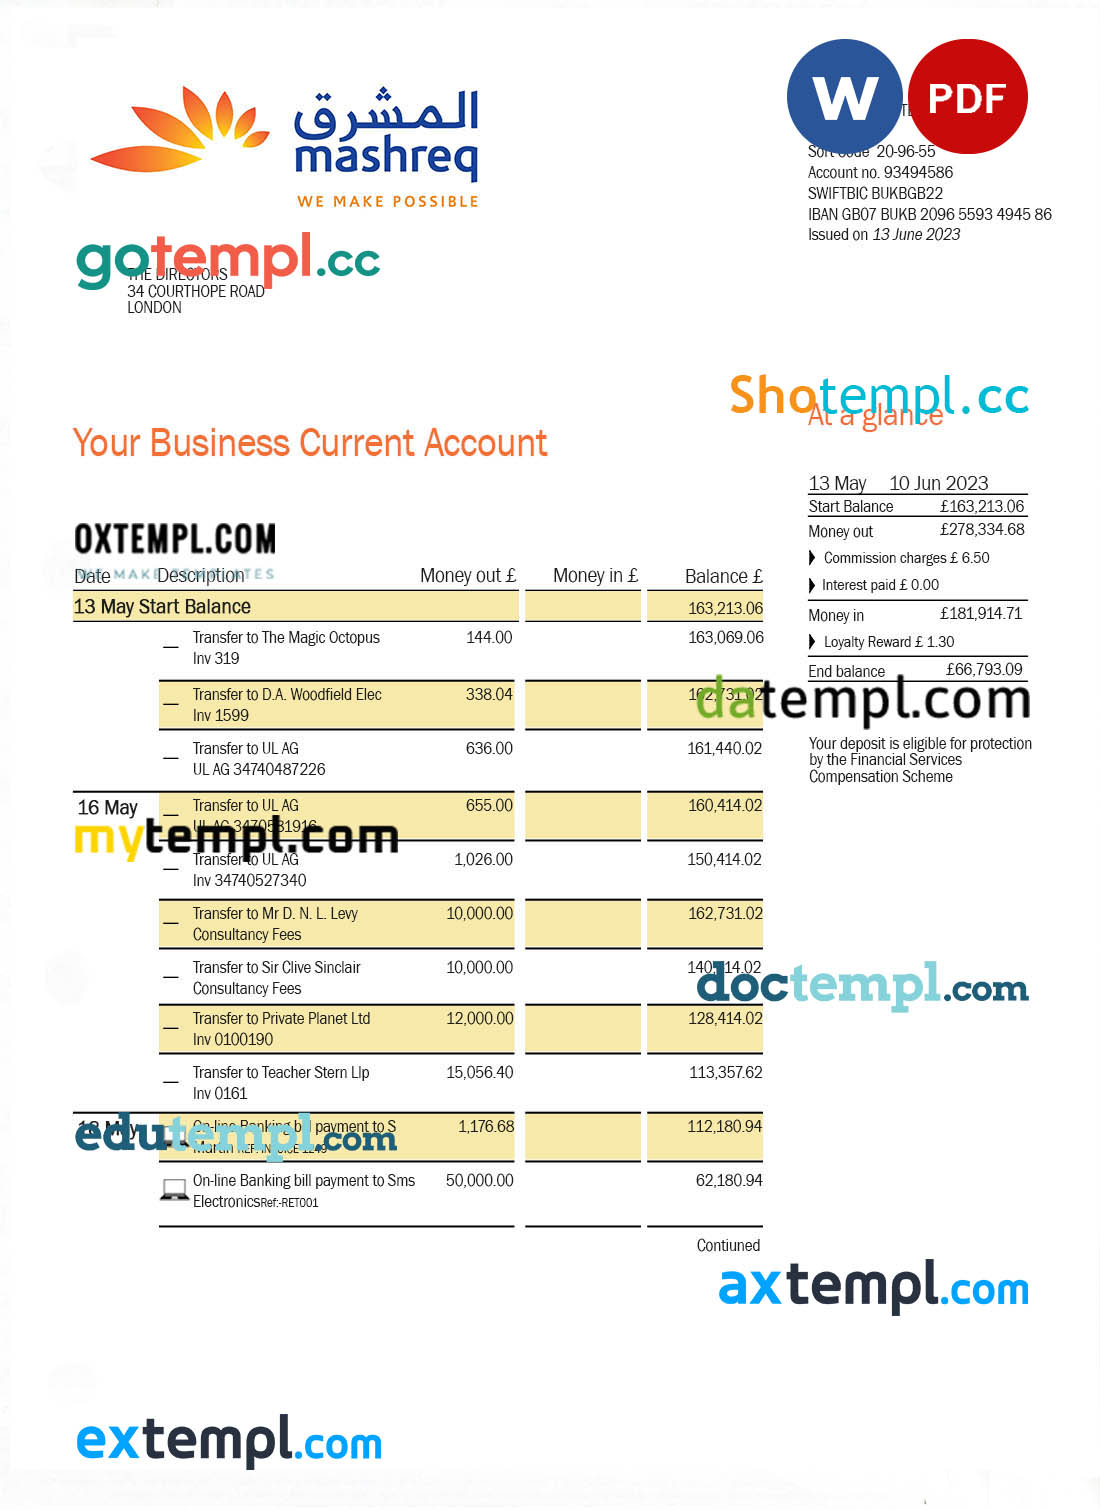 Argentina Banco Macro S.A. bank statement template in Word and PDF format